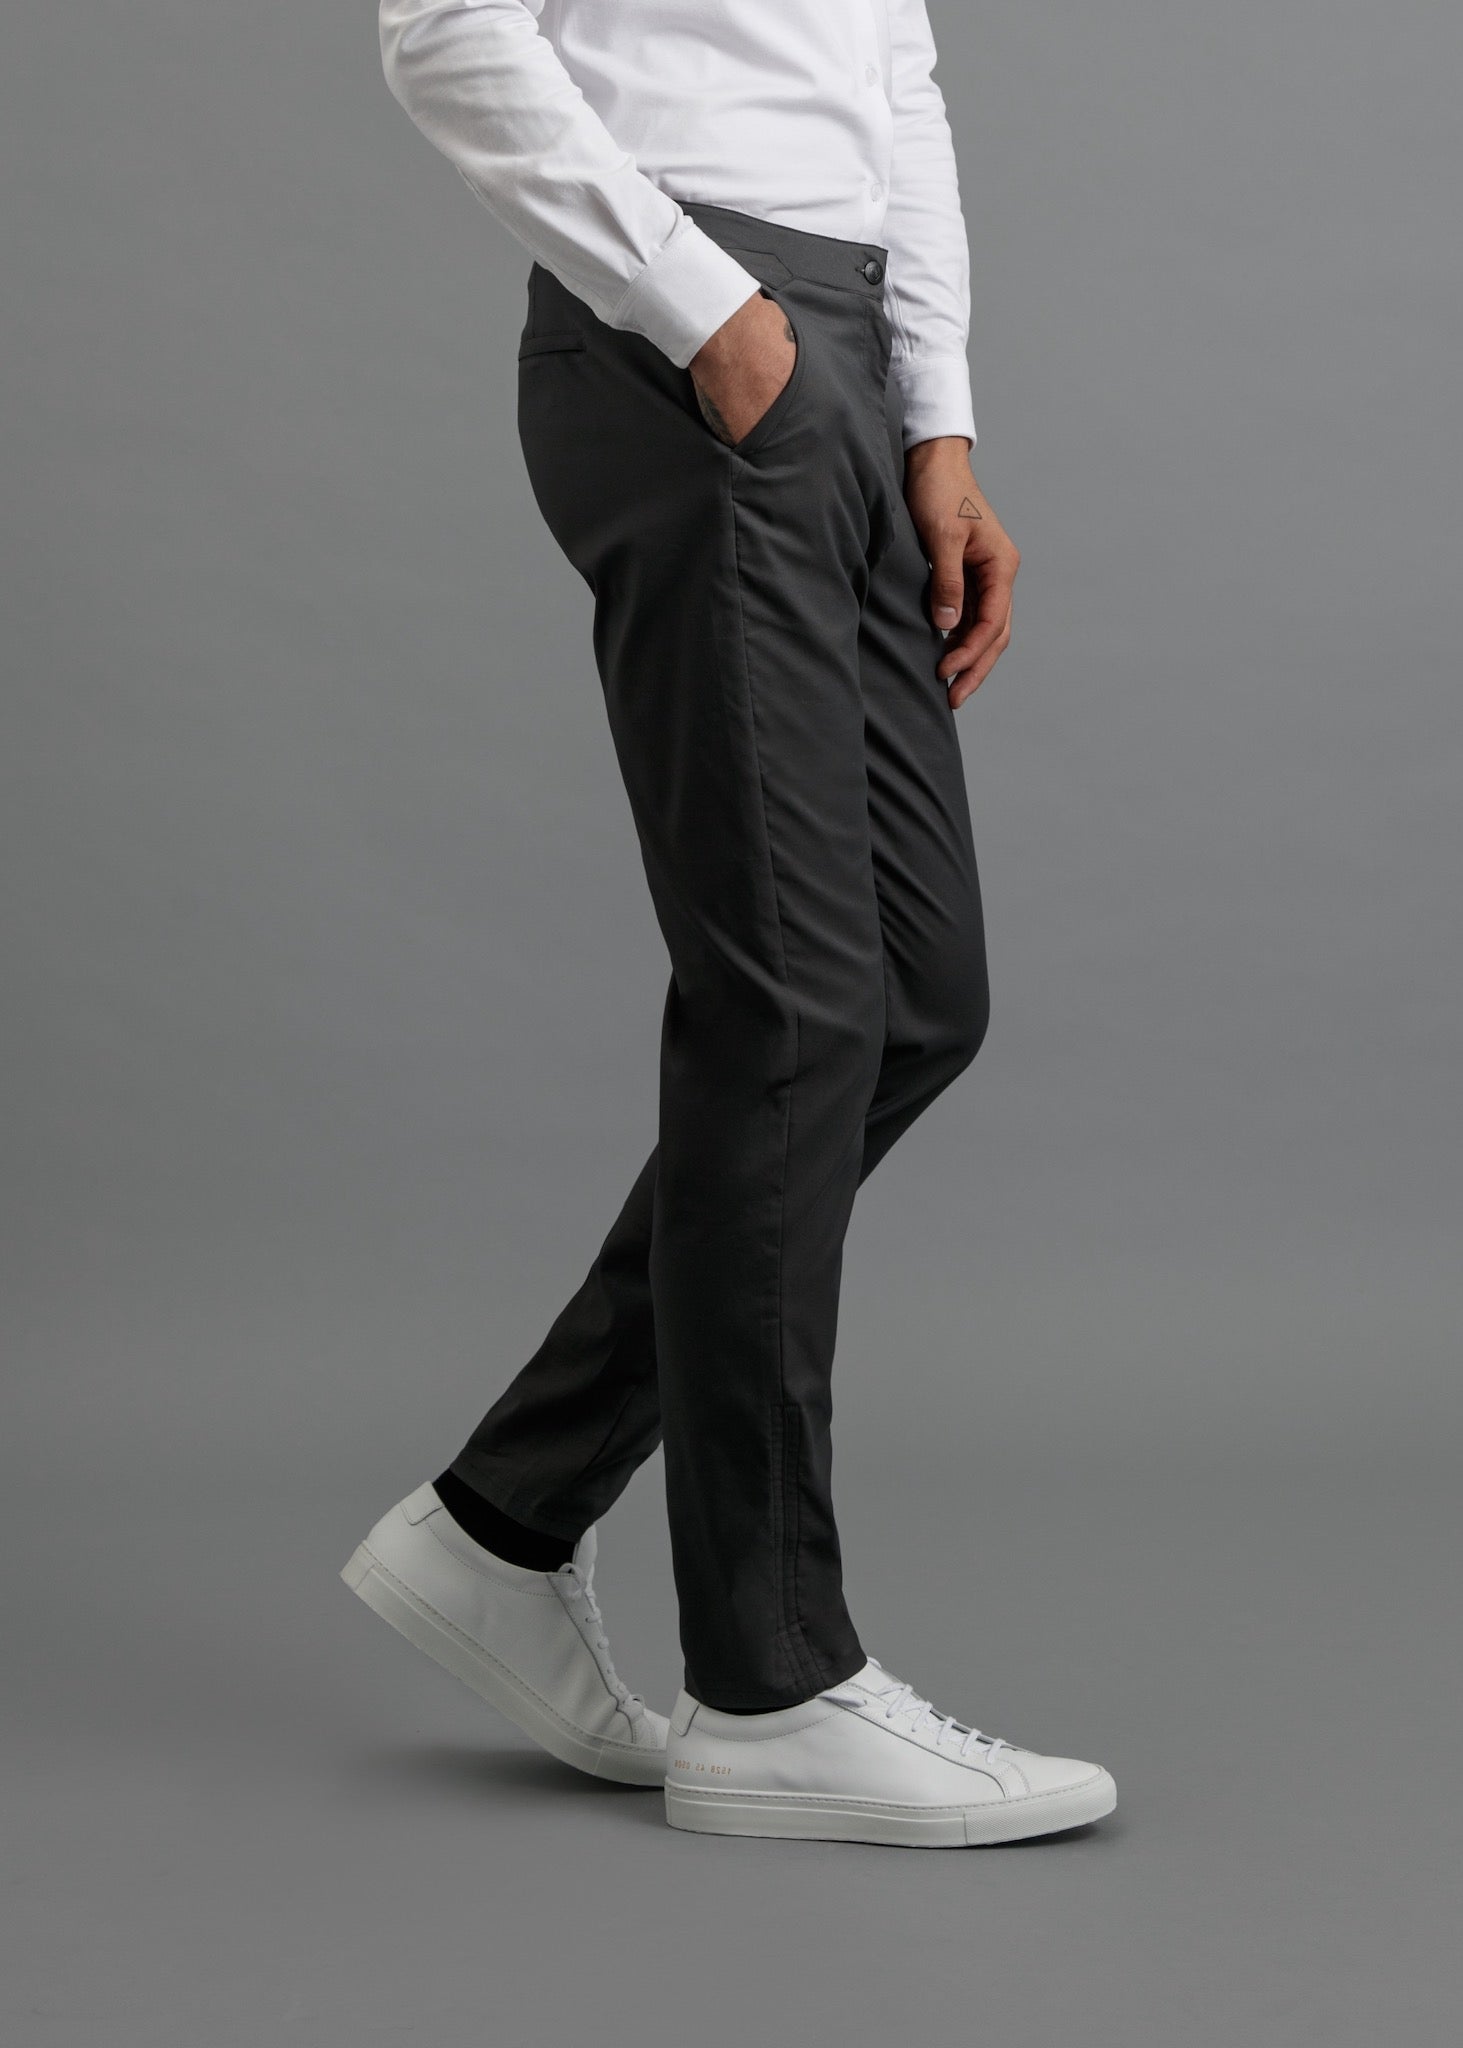 Buy JEENAY Synthetic Formal Pants for Men | Mens Fashion Wrinkle-free  Stylish Slim Fit Men's Wear Trouser Pant for Office or Party - 28 US, Black  Online at Best Prices in India - JioMart.